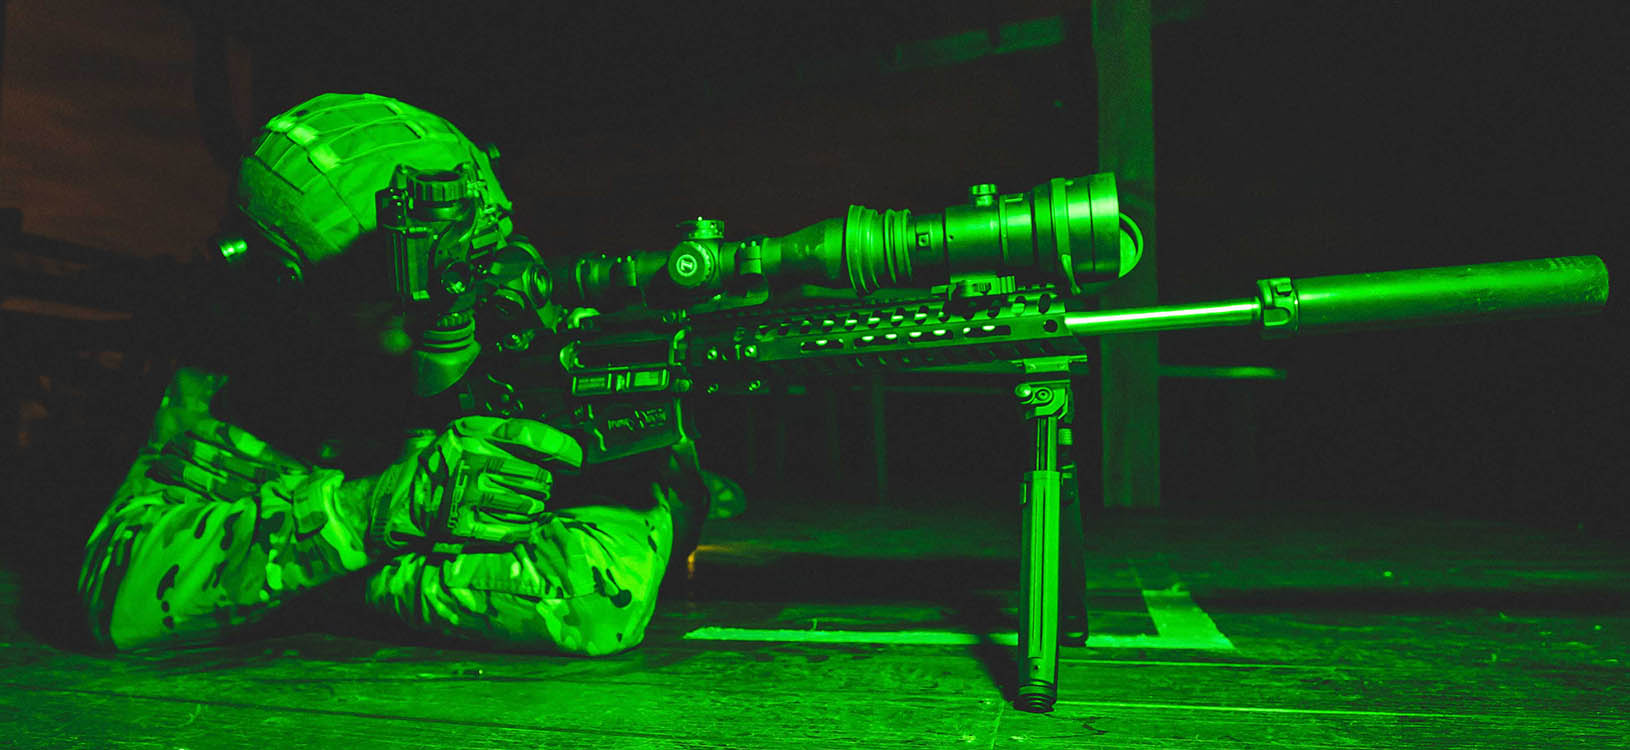 The best night-vision scope for a newbie